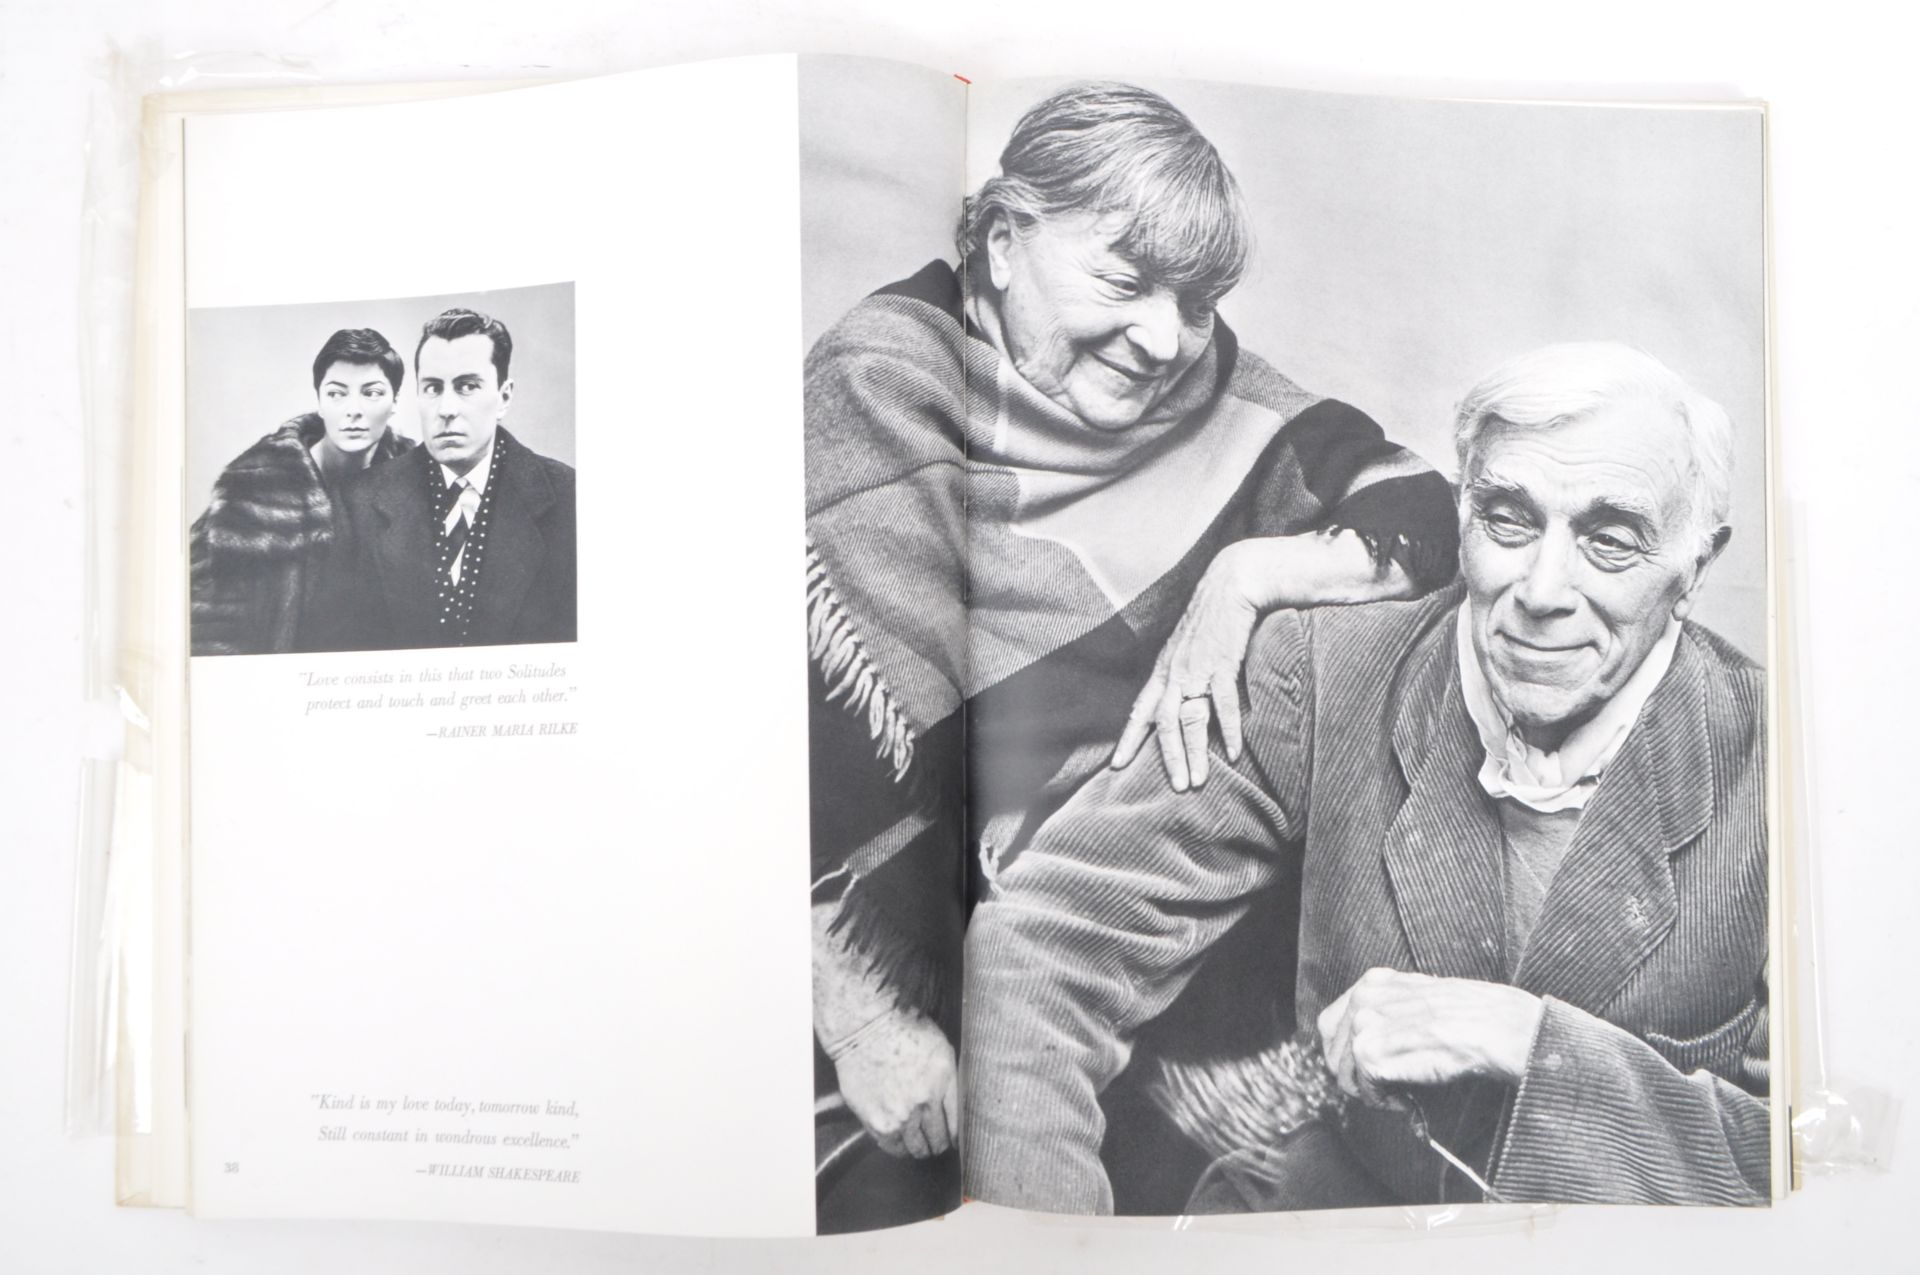 RICHARD AVEDON TRUMAN CAPOTE OBSERVATIONS PHOTOGRAPHY BOOK - Image 4 of 6